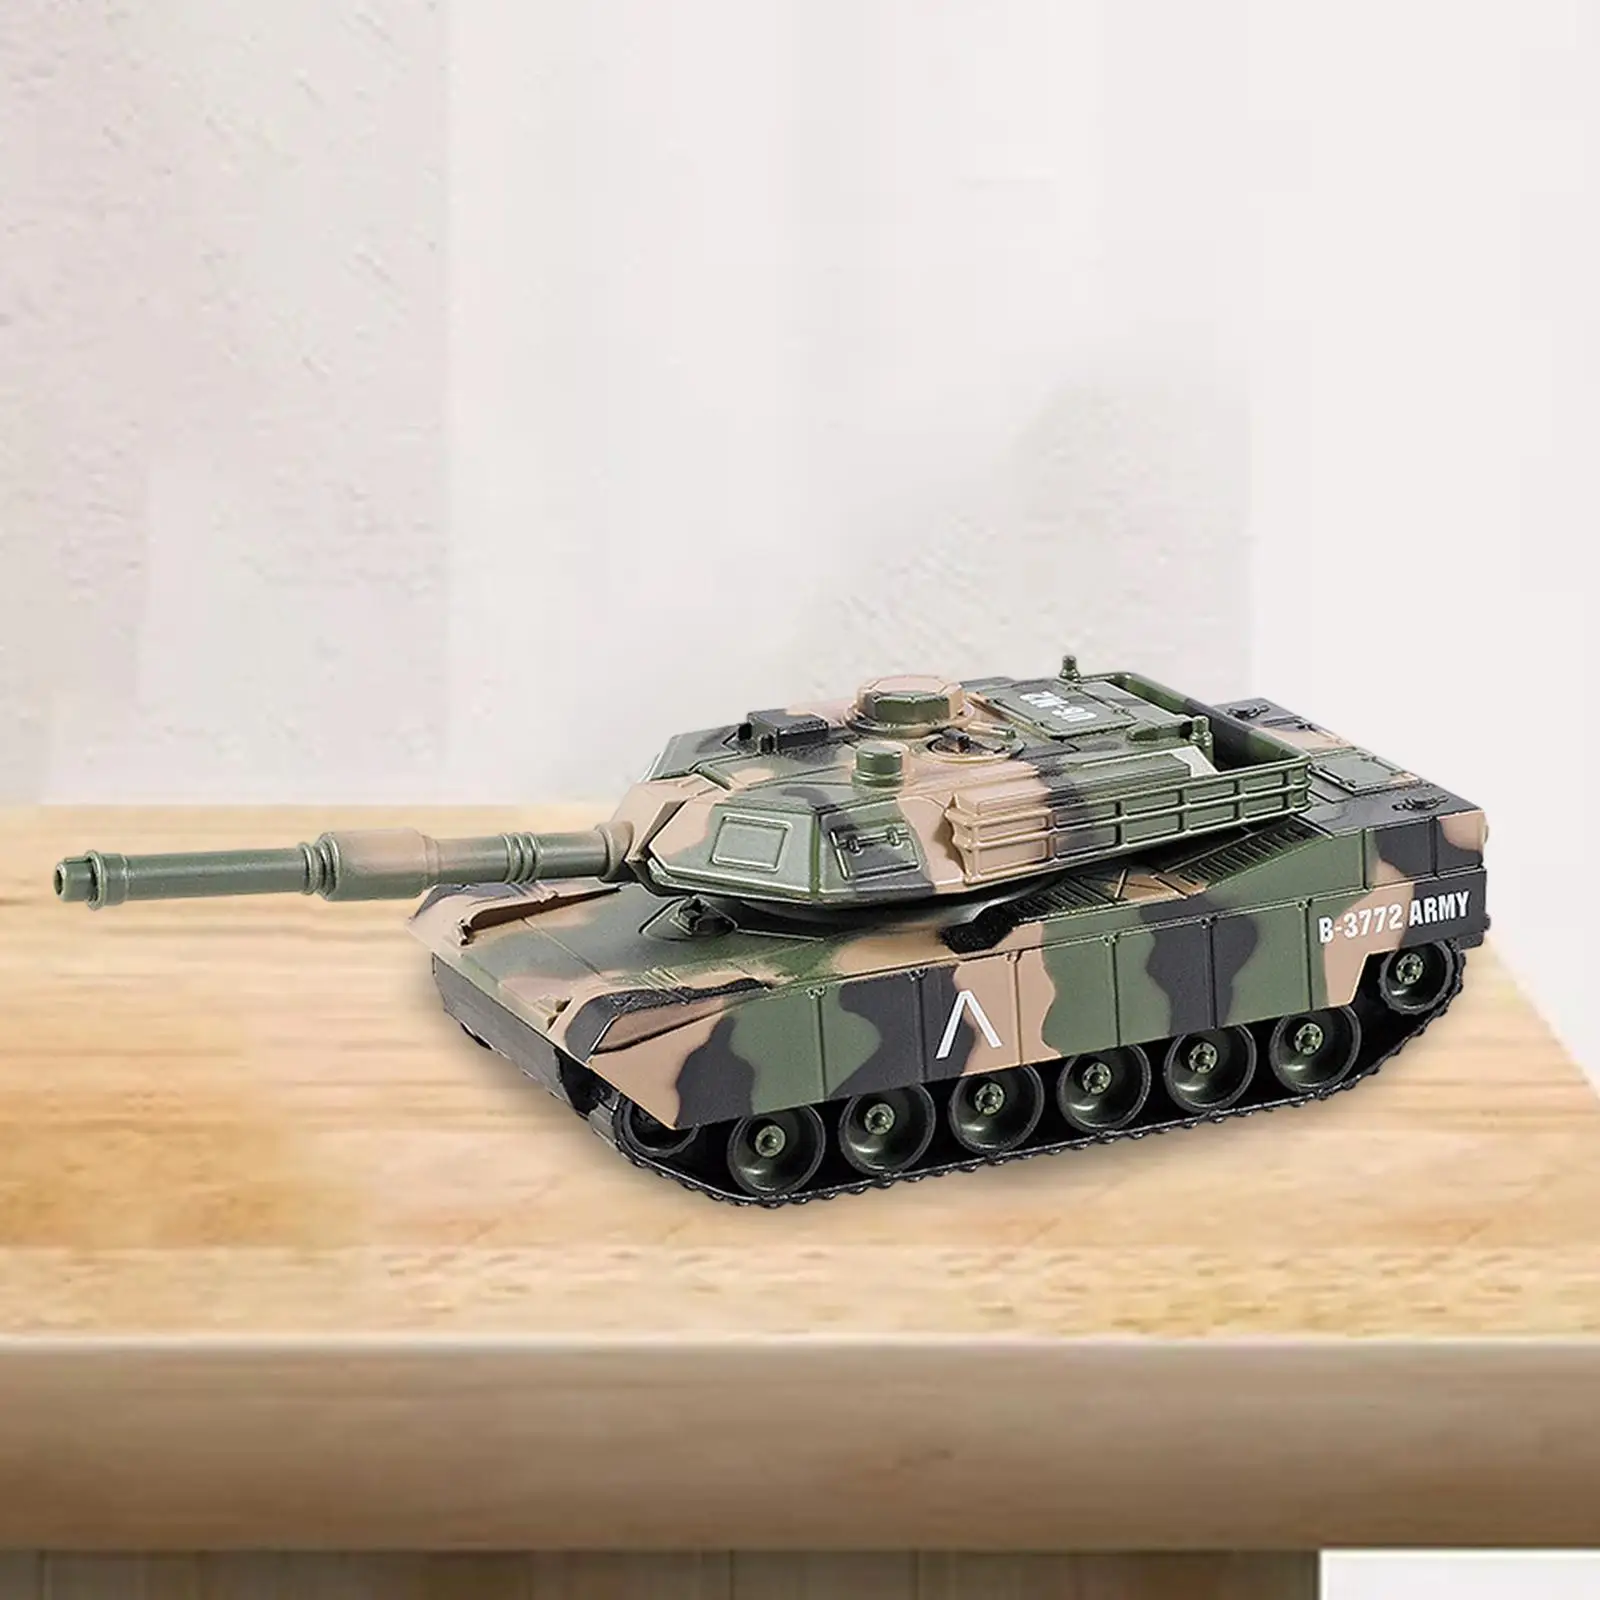 1:24 Tank Toy Realistic with Light and Sound Party Favors Pullback Motion Pull Back Tank Toy for Girls Boys 3-7 Years Old Gift